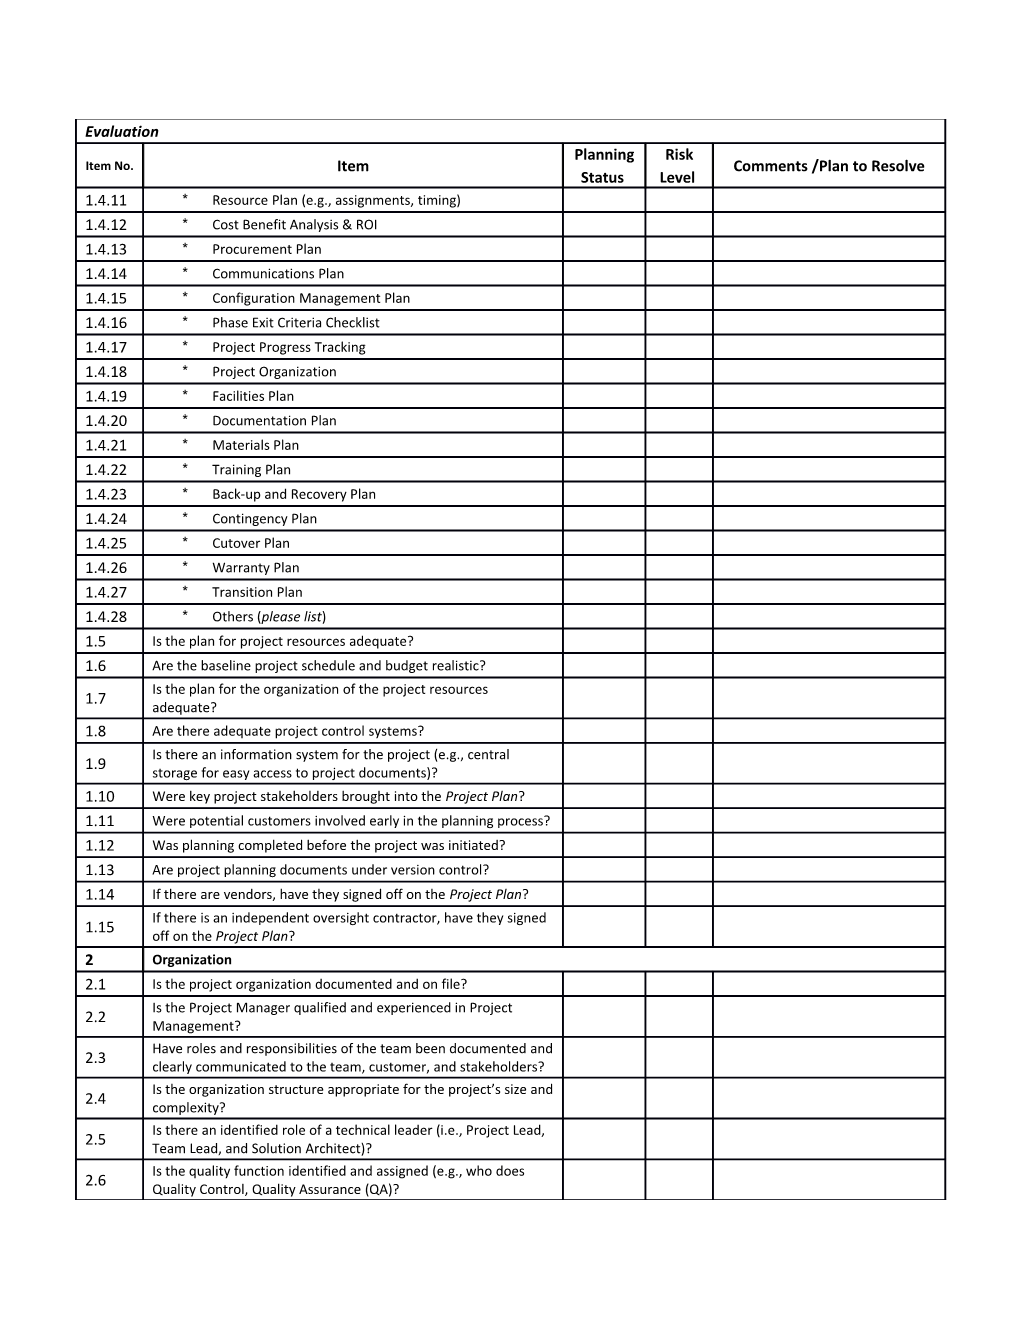 Project Planning Risk Evaluation Checklist Template